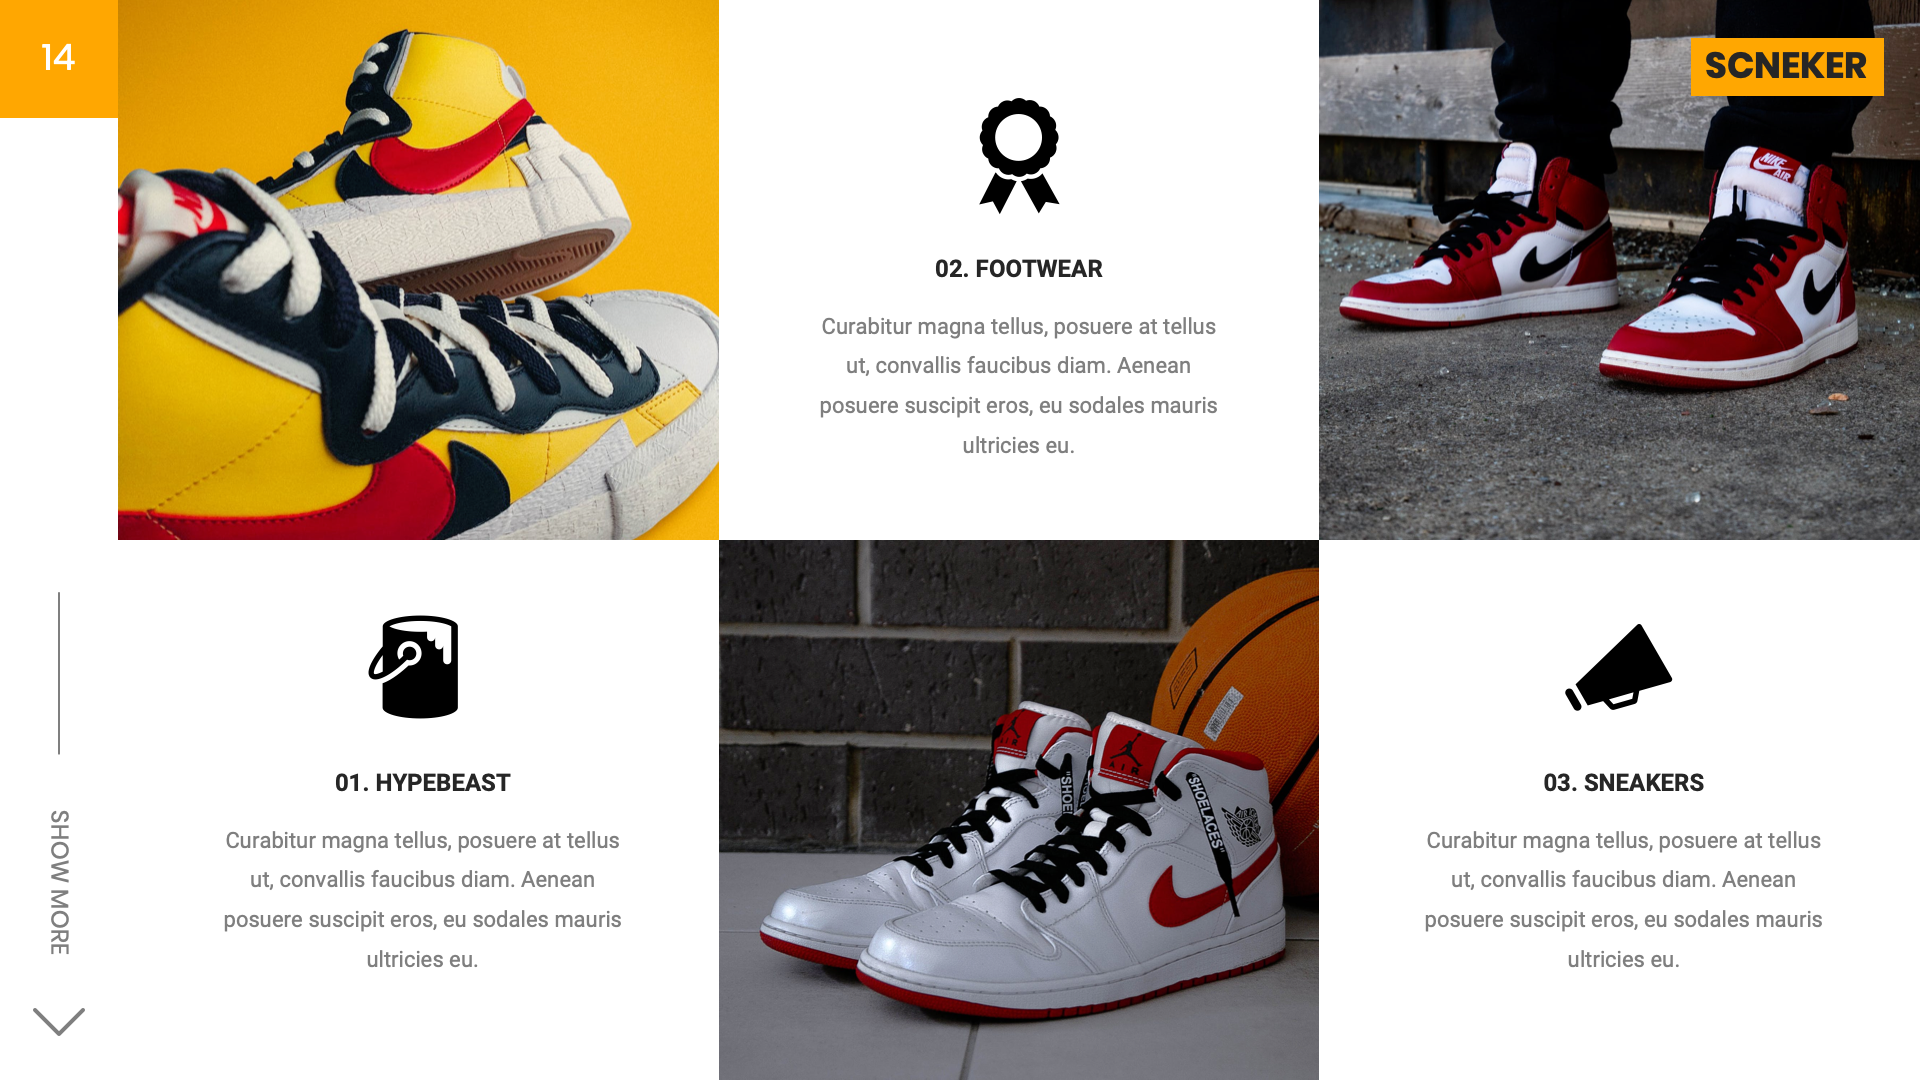 scneker-shoes-and-sneakers-powerpoint-presentation-templates